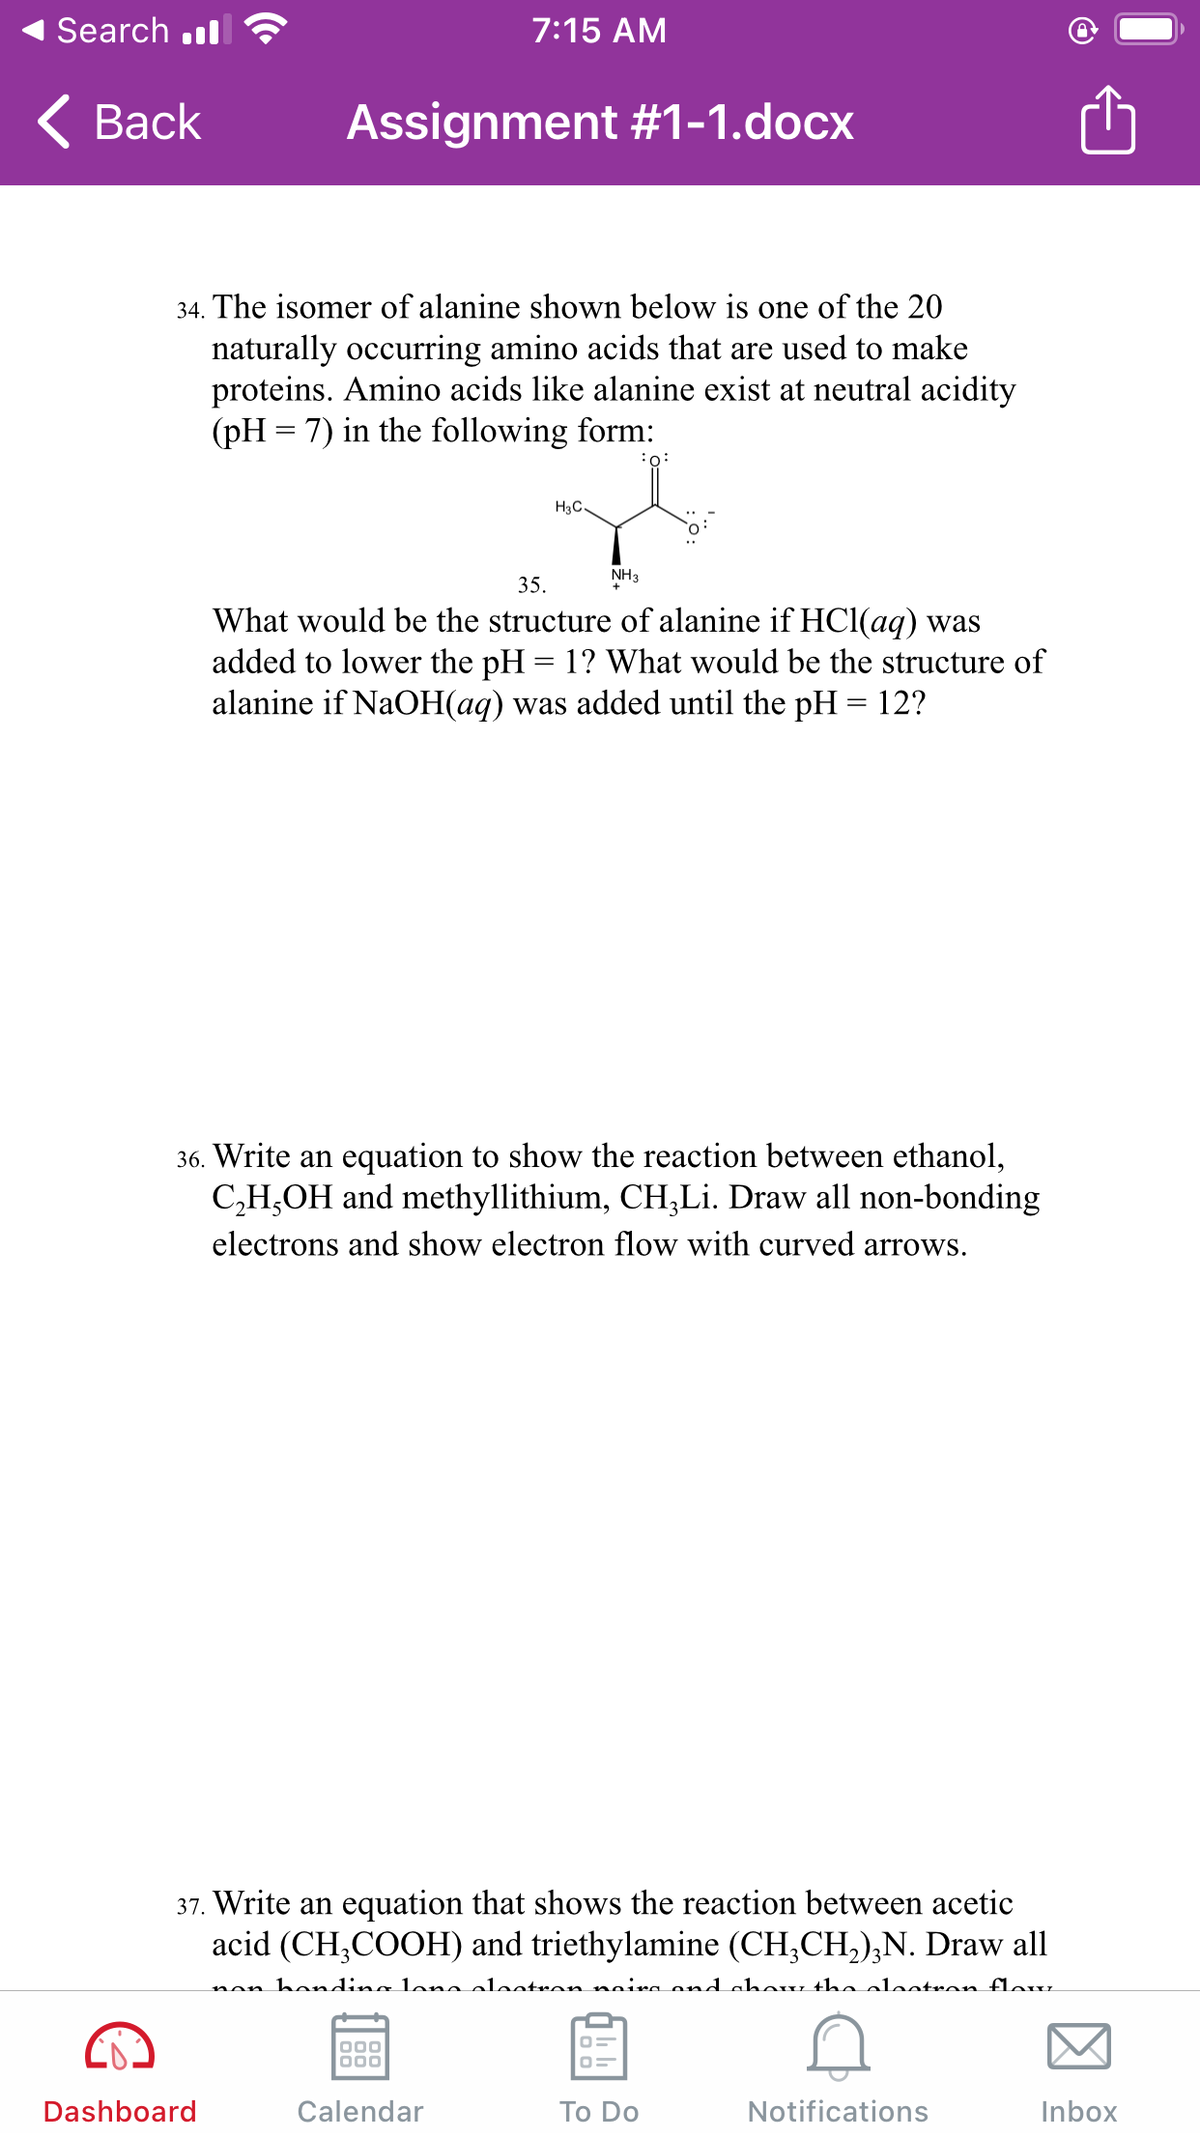 Search .l
7:15 AM
< Вack
Assignment #1-1.docx
34. The isomer of alanine shown below is one of the 20
naturally occurring amino acids that are used to make
proteins. Amino acids like alanine exist at neutral acidity
(pH = 7) in the following form:
:0:
H3C-
NH3
35.
What would be the structure of alanine if HCl(aq) was
added to lower the pH = 1? What would be the structure of
alanine if NaOH(aq) was added until the pH = 12?
36. Write an equation to show the reaction between ethanol,
C,H,OH and methyllithium, CH,Li. Draw all non-bonding
electrons and show electron flow with curved arrows.
37. Write an equation that shows the reaction between acetic
acid (CH,COOH) and triethylamine (CH;CH,),N. Draw all
non hondina lona elaotron naira ond chow the olootron flouu
Dashboard
Calendar
Тo Do
Notifications
Inbox
